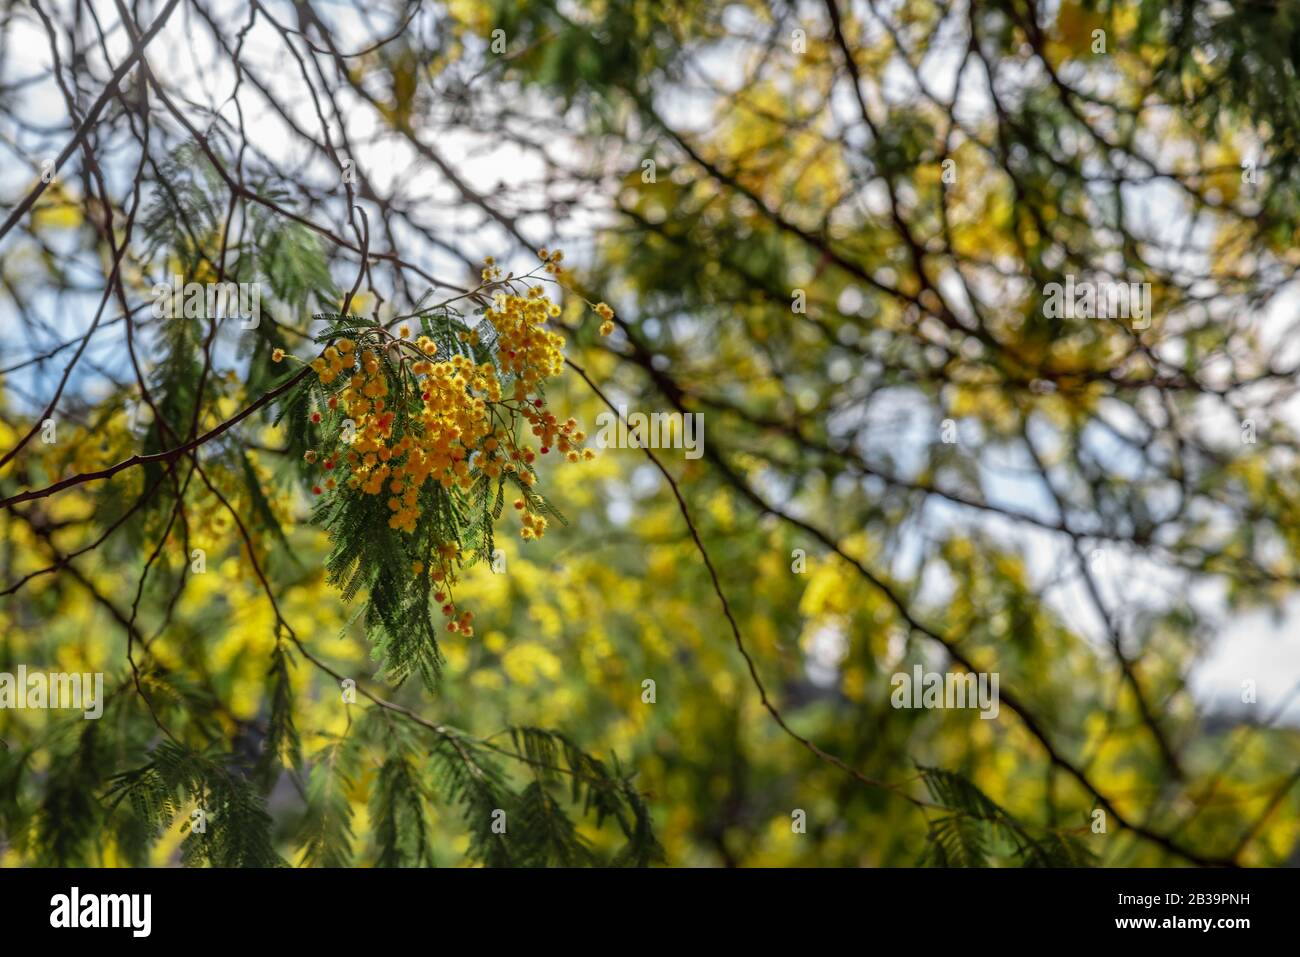 Little yellow flowers with cotton texture on a branch of a tree Stock Photo